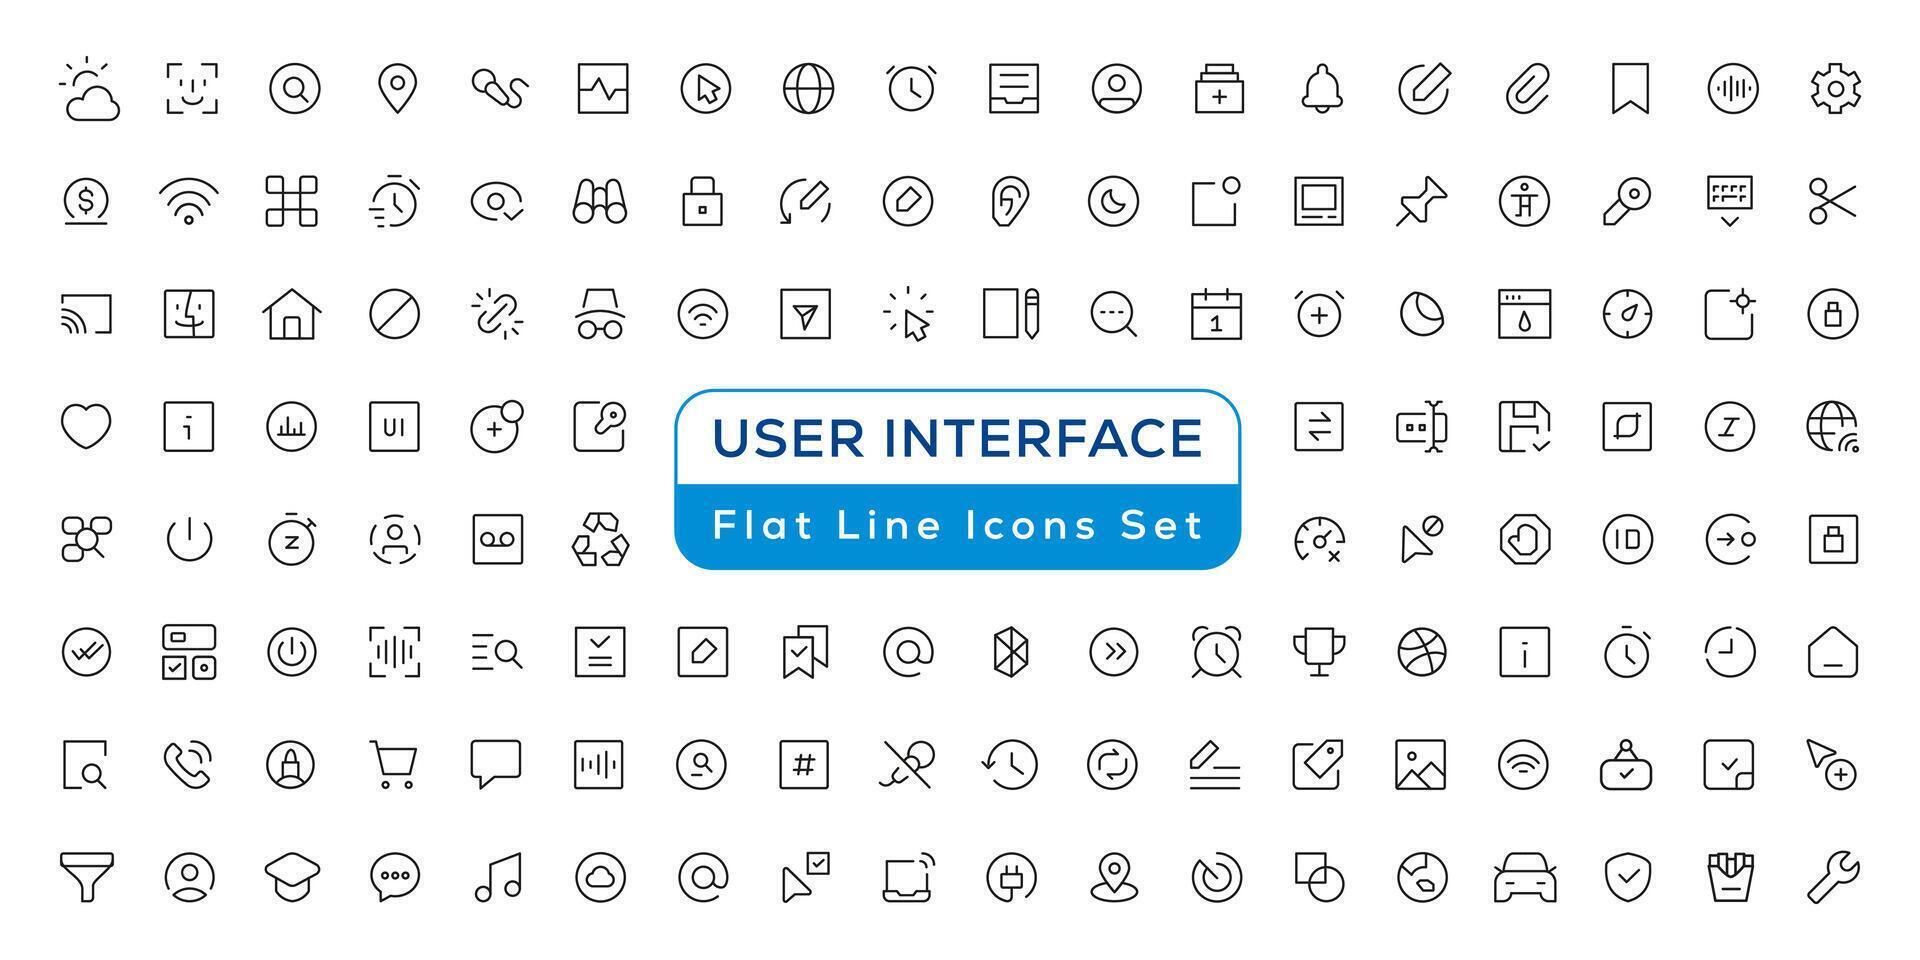 Mega set of ui ux icons, user interface icon set collection vector